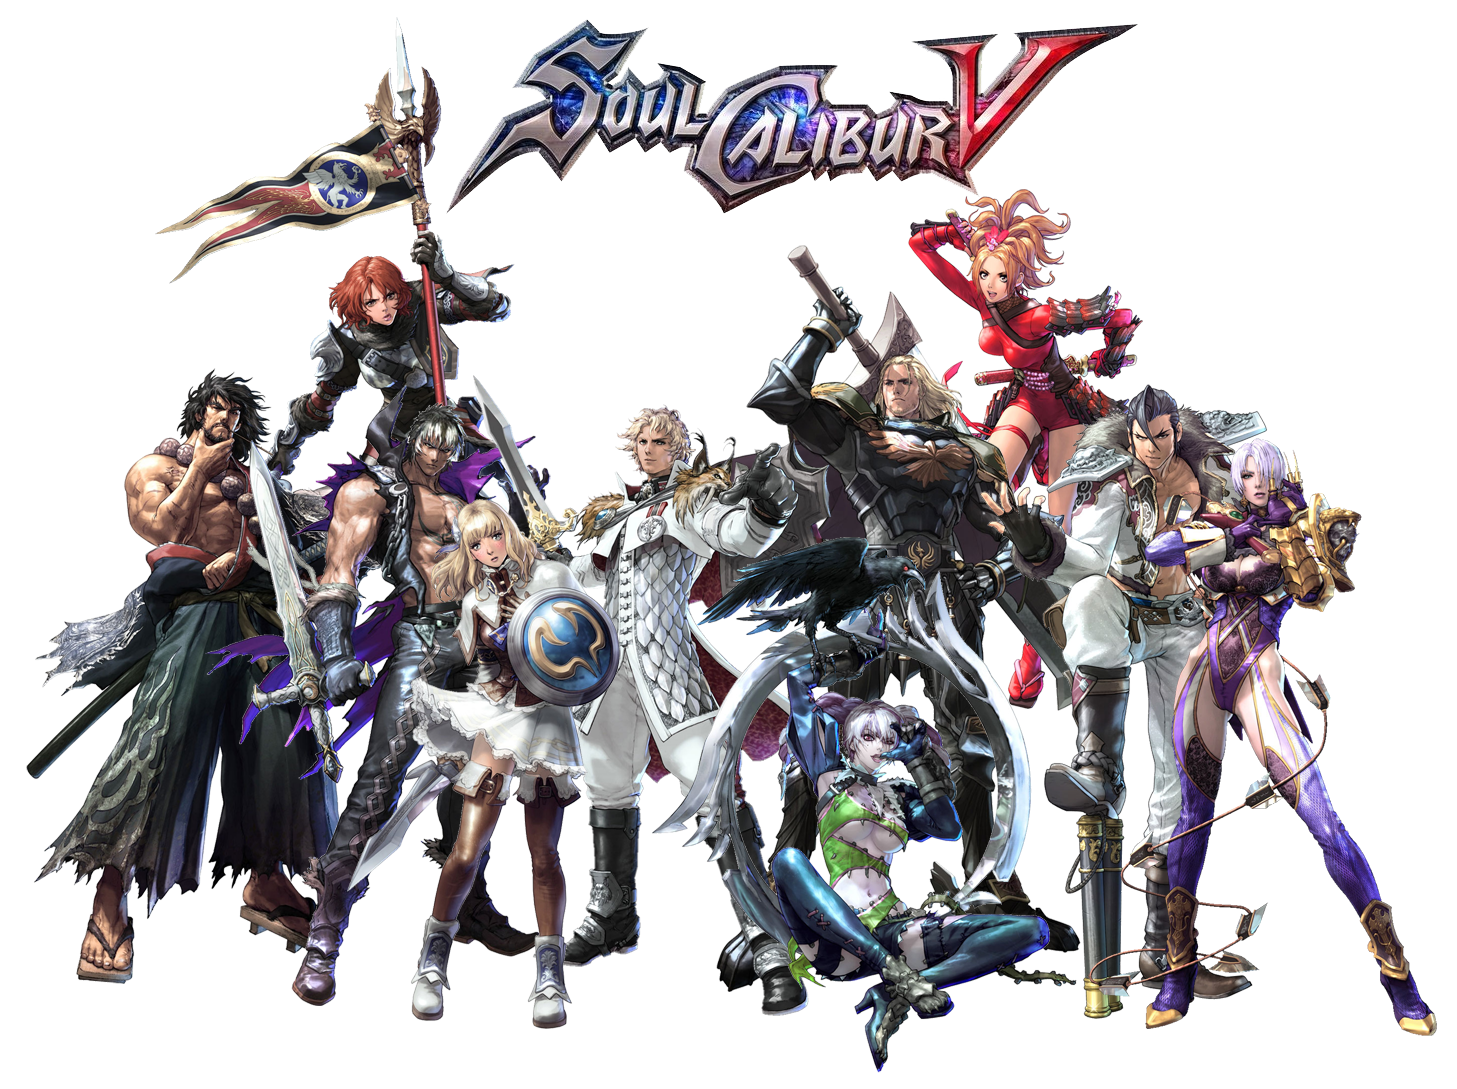 ... Soul Calibur V Review (PS3): The soul giveth and the sword taketh away